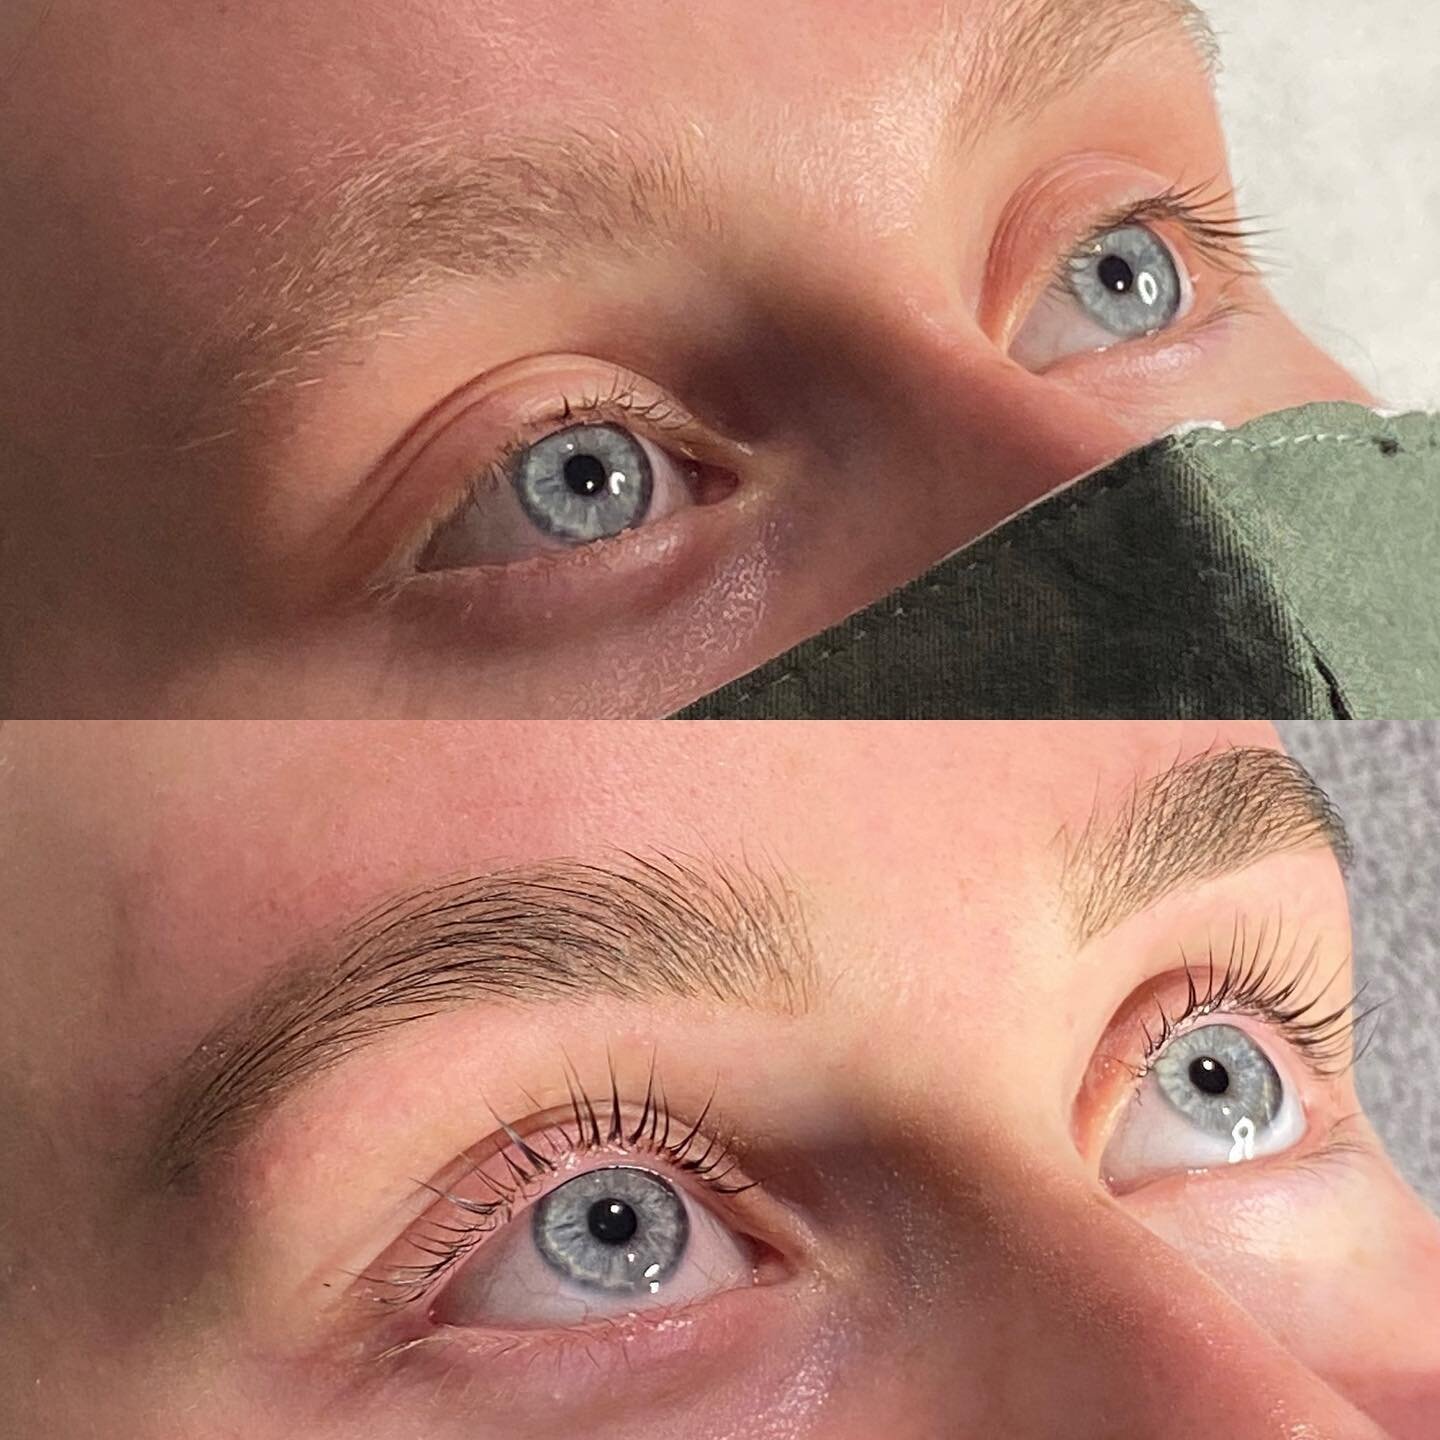 LVL ENHANCE LASHES &amp; HD BROW COMBO...perfect 

This gorgeous girl has the most incredible eyes! 

Do your research ladies, check out why the Nouveau Group are the BEST out there and give the best lash lift results...just because they say it's an 